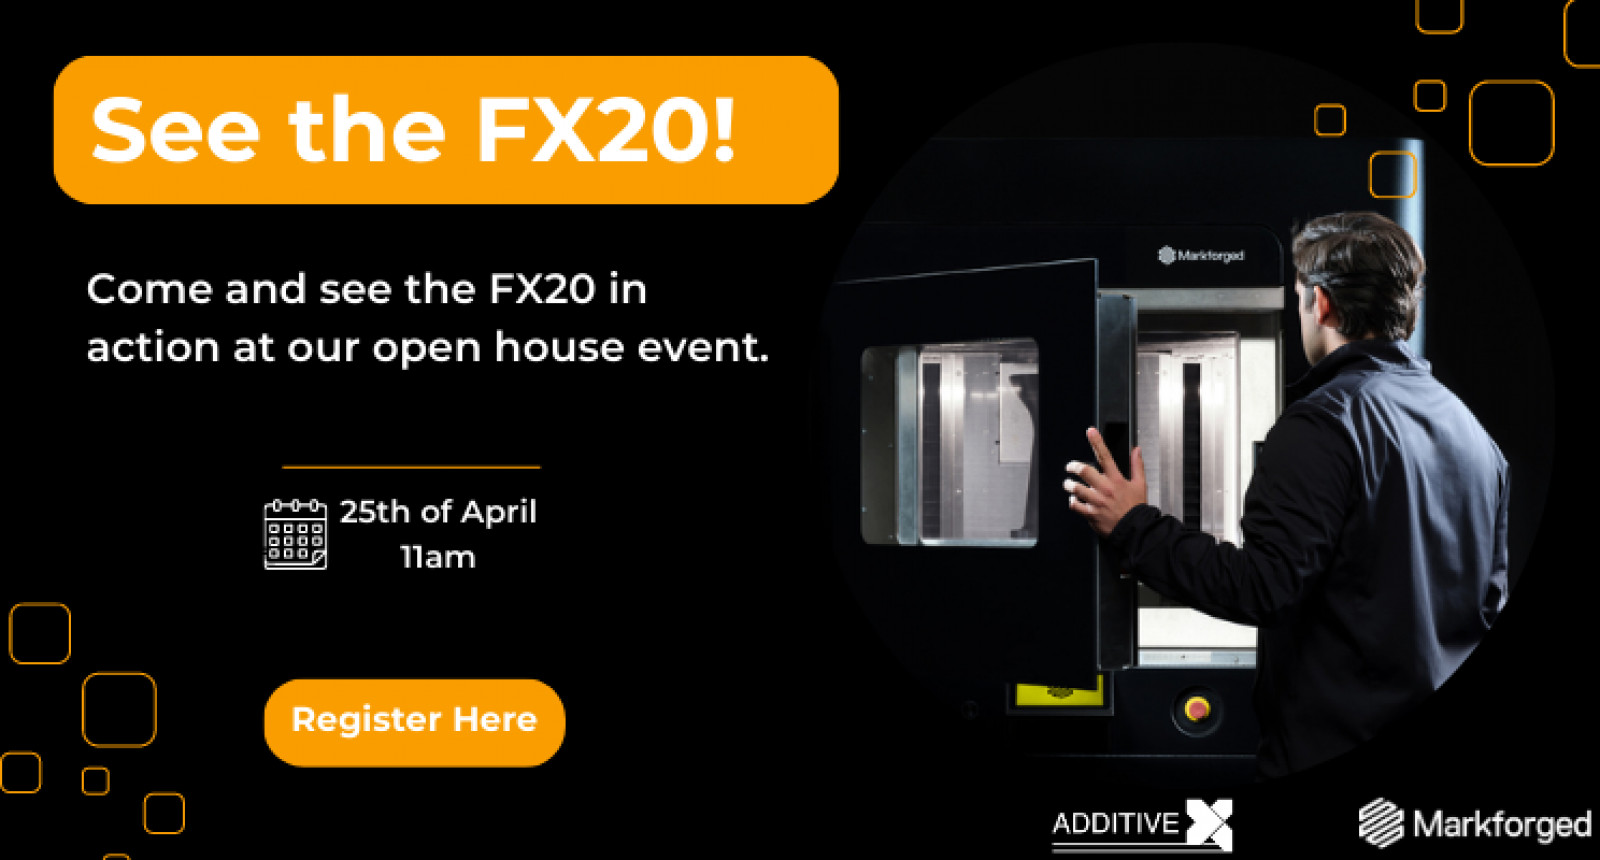 Additive-X Open House Event Showcasing Markforged...